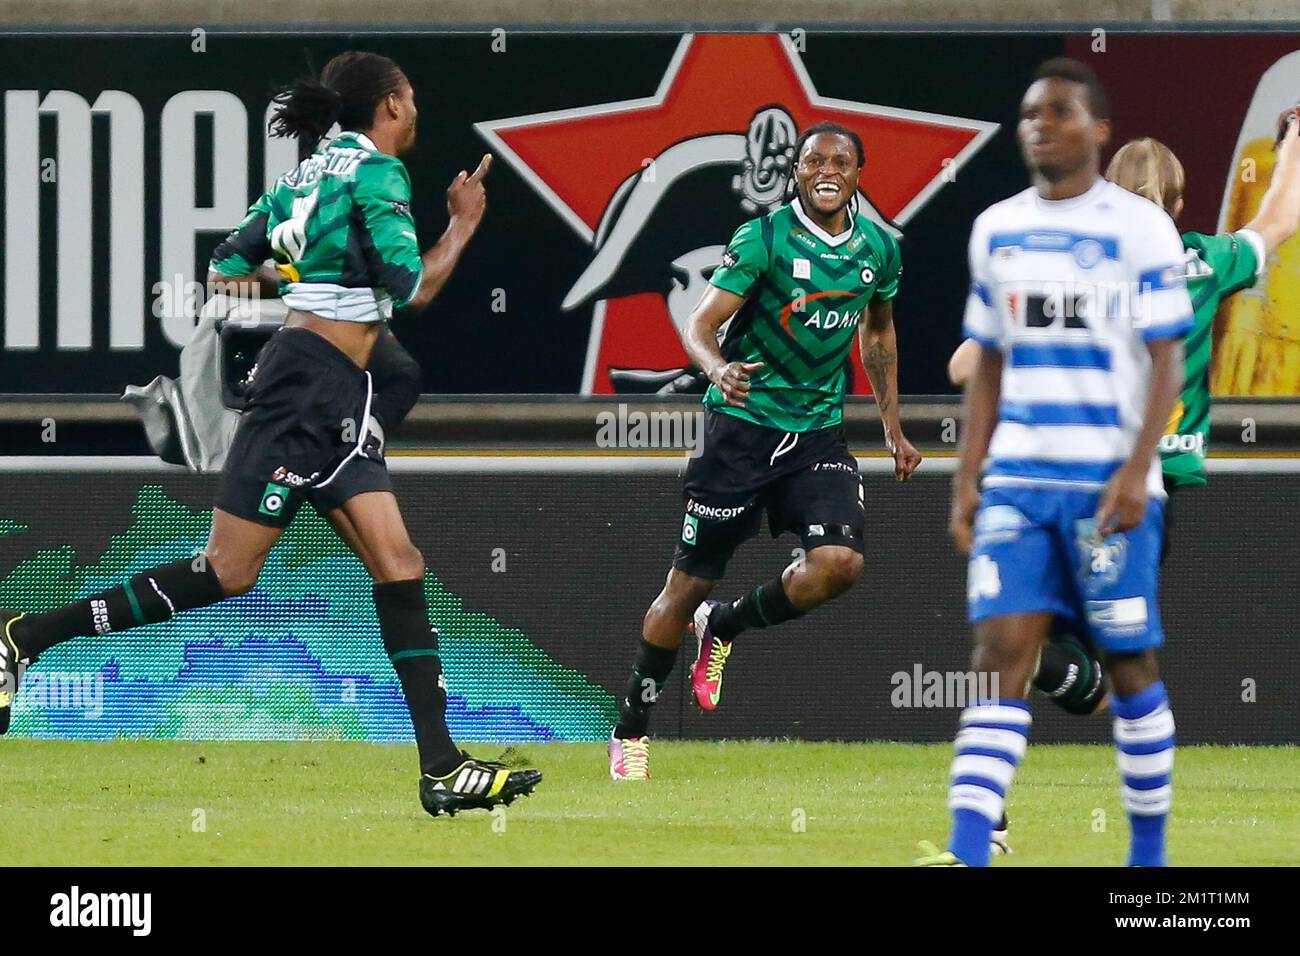 20131025 - GENT, BELGIUM: Cercle's Michael Uchebo celebrates after scoring during the Jupiler Pro League match between KAA Gent and Cercle Brugge, in Gent, Friday 25 October 2013, on day 12 of the Belgian soccer championship. BELGA PHOTO BRUNO FAHY Stock Photo